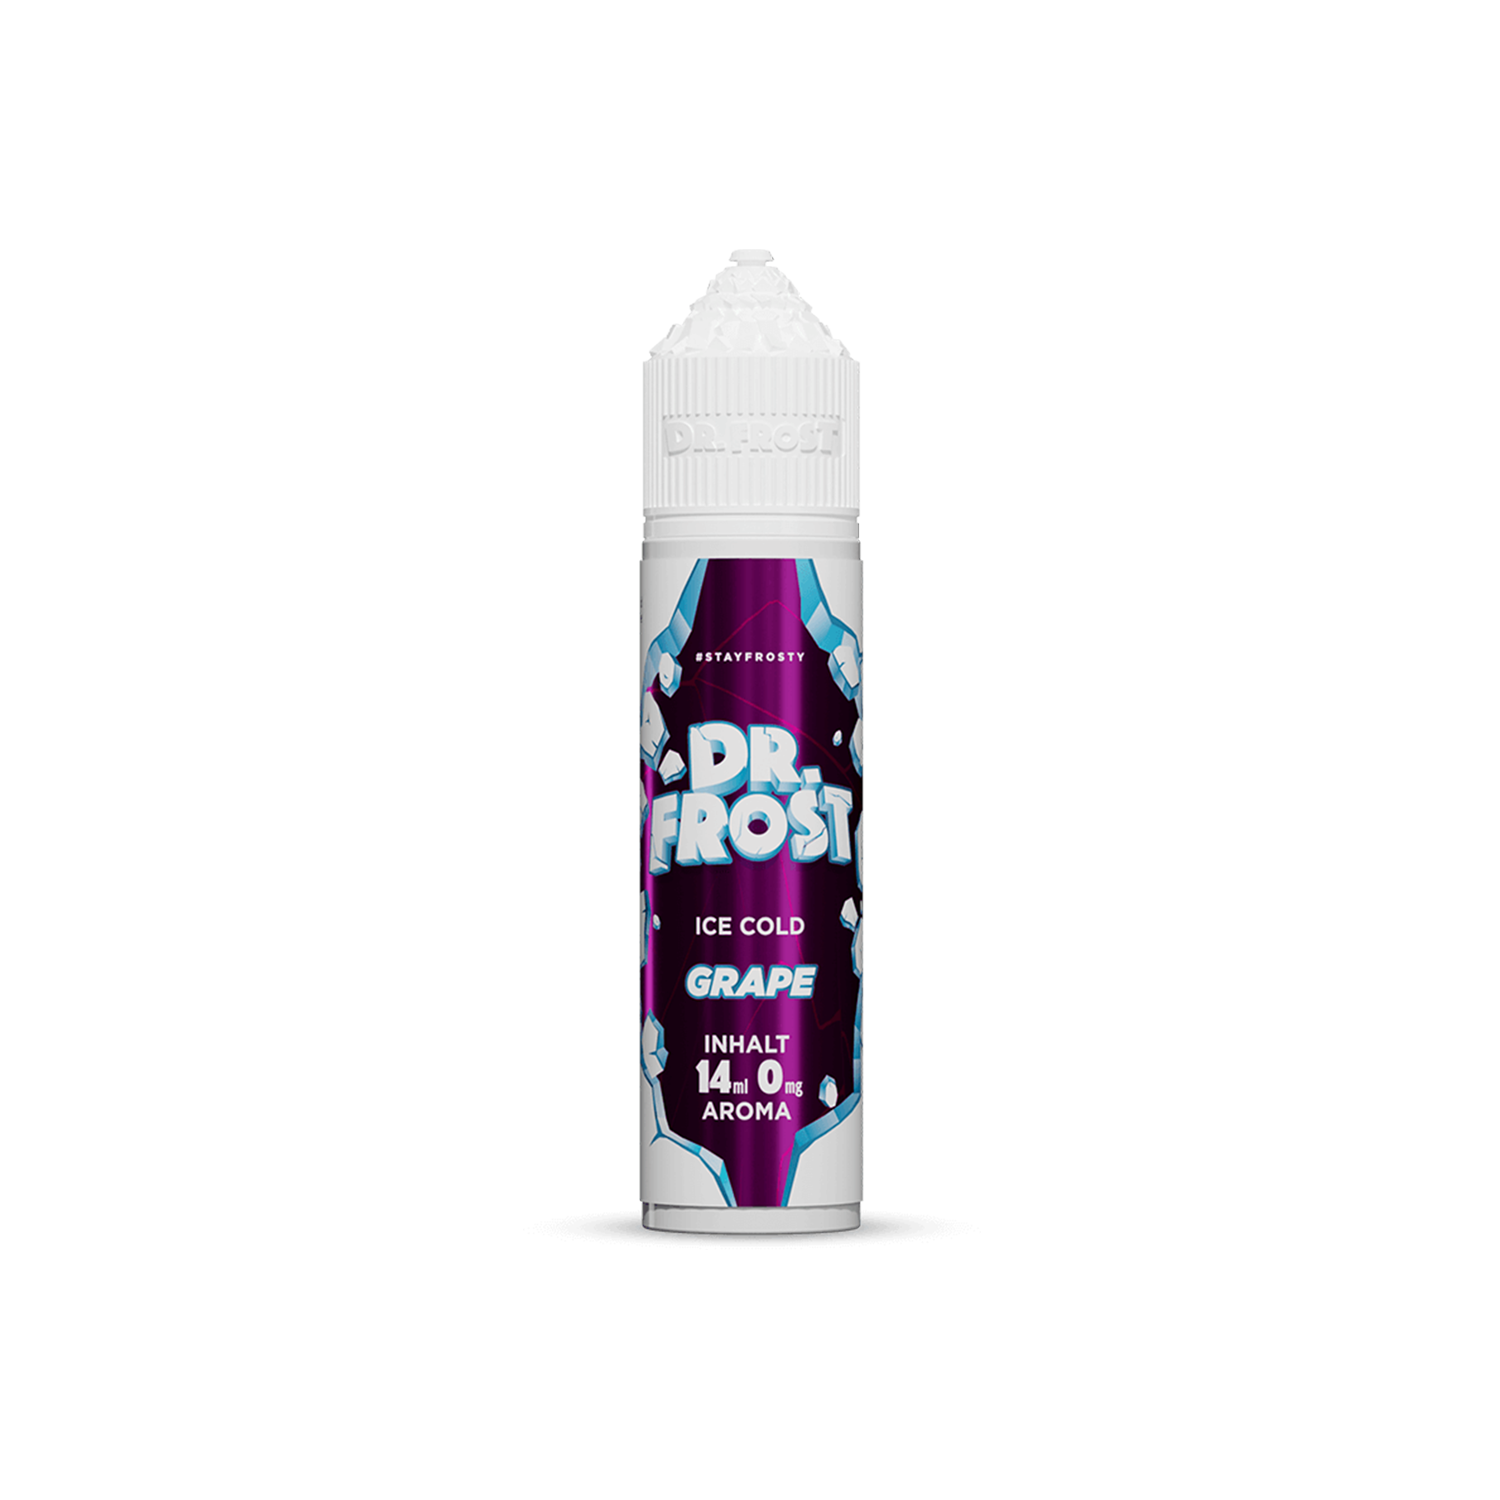 Dr. Frost - Ice Cold - Grape 14 ml Aroma 